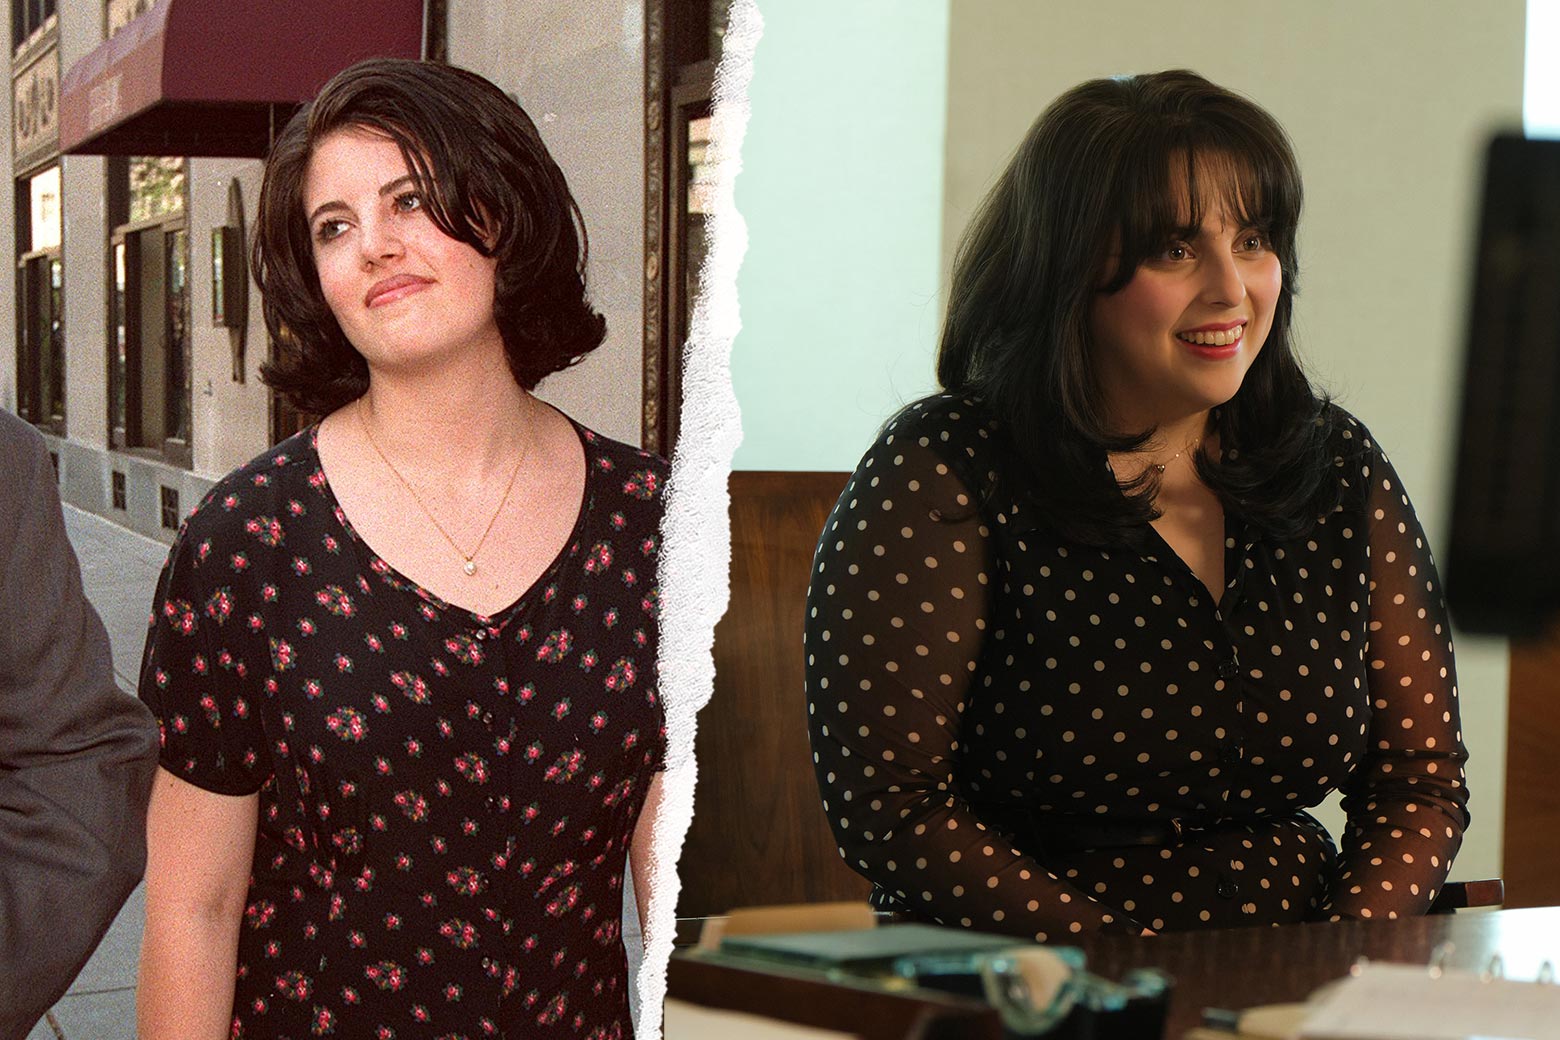 Lewinsky in a black dress with red flowers on it, and Feldstein as Lewinsky in a black dress with polka dots.